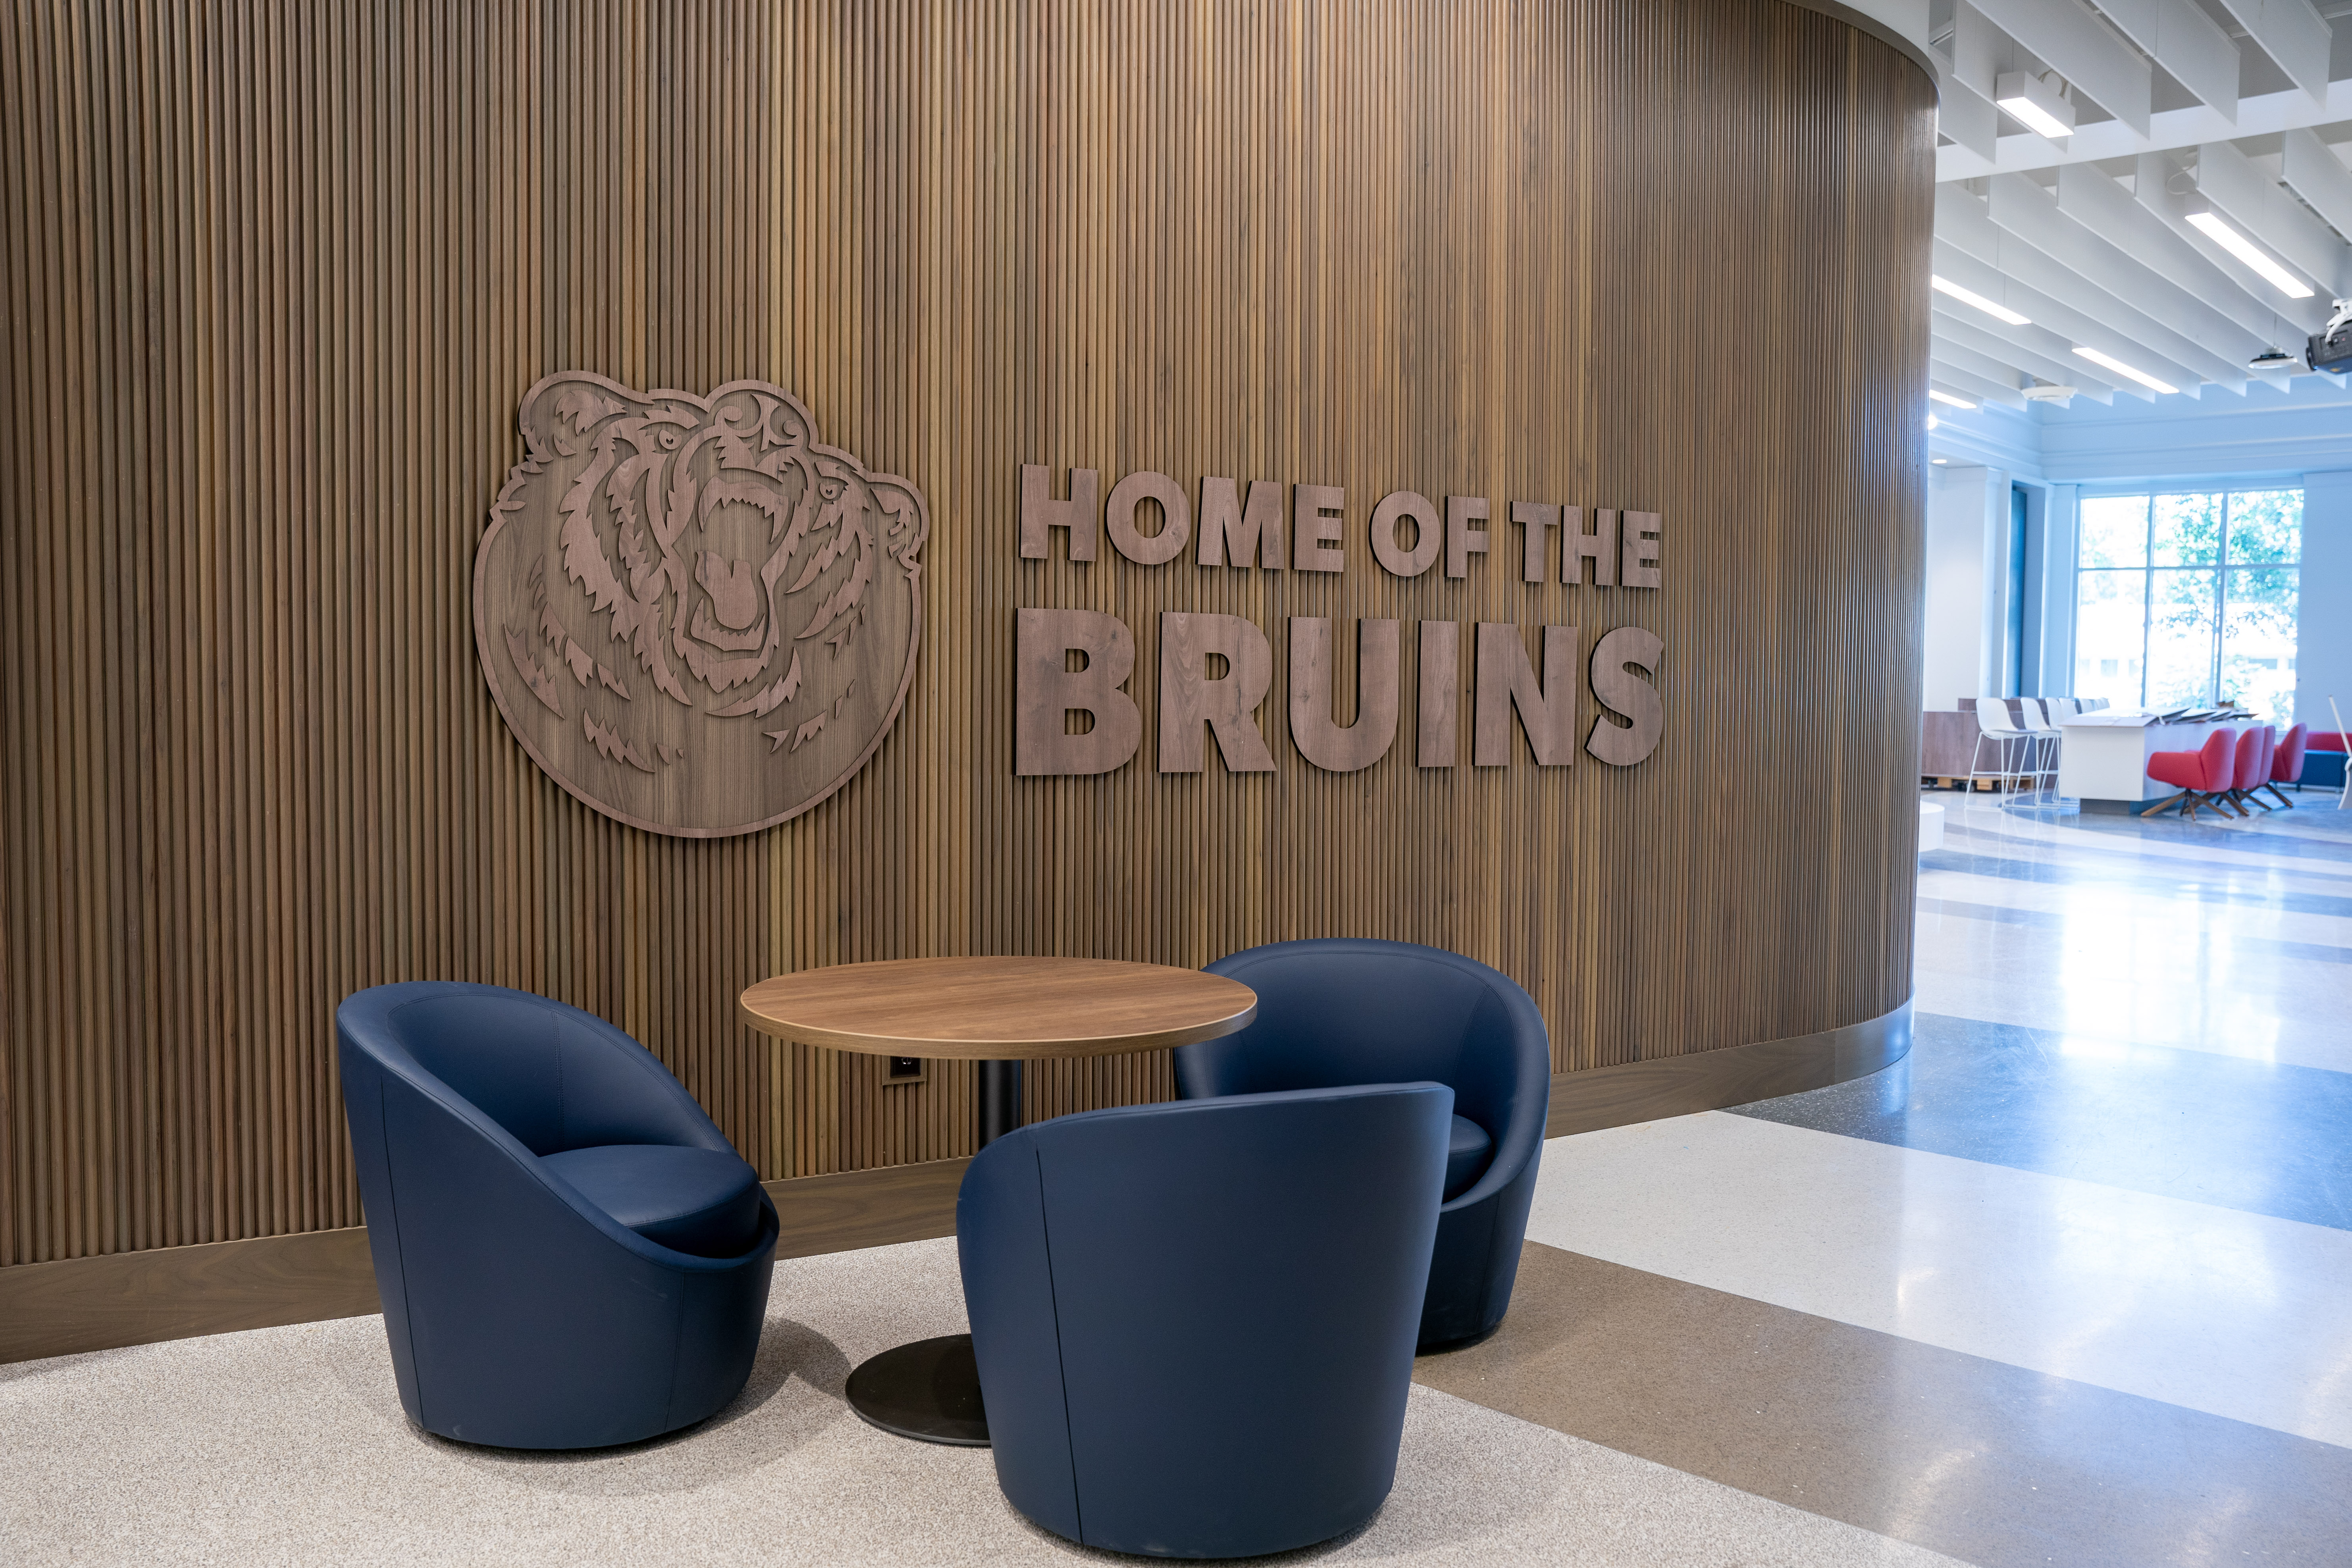 Home of the Bruins sign in the Massey Center